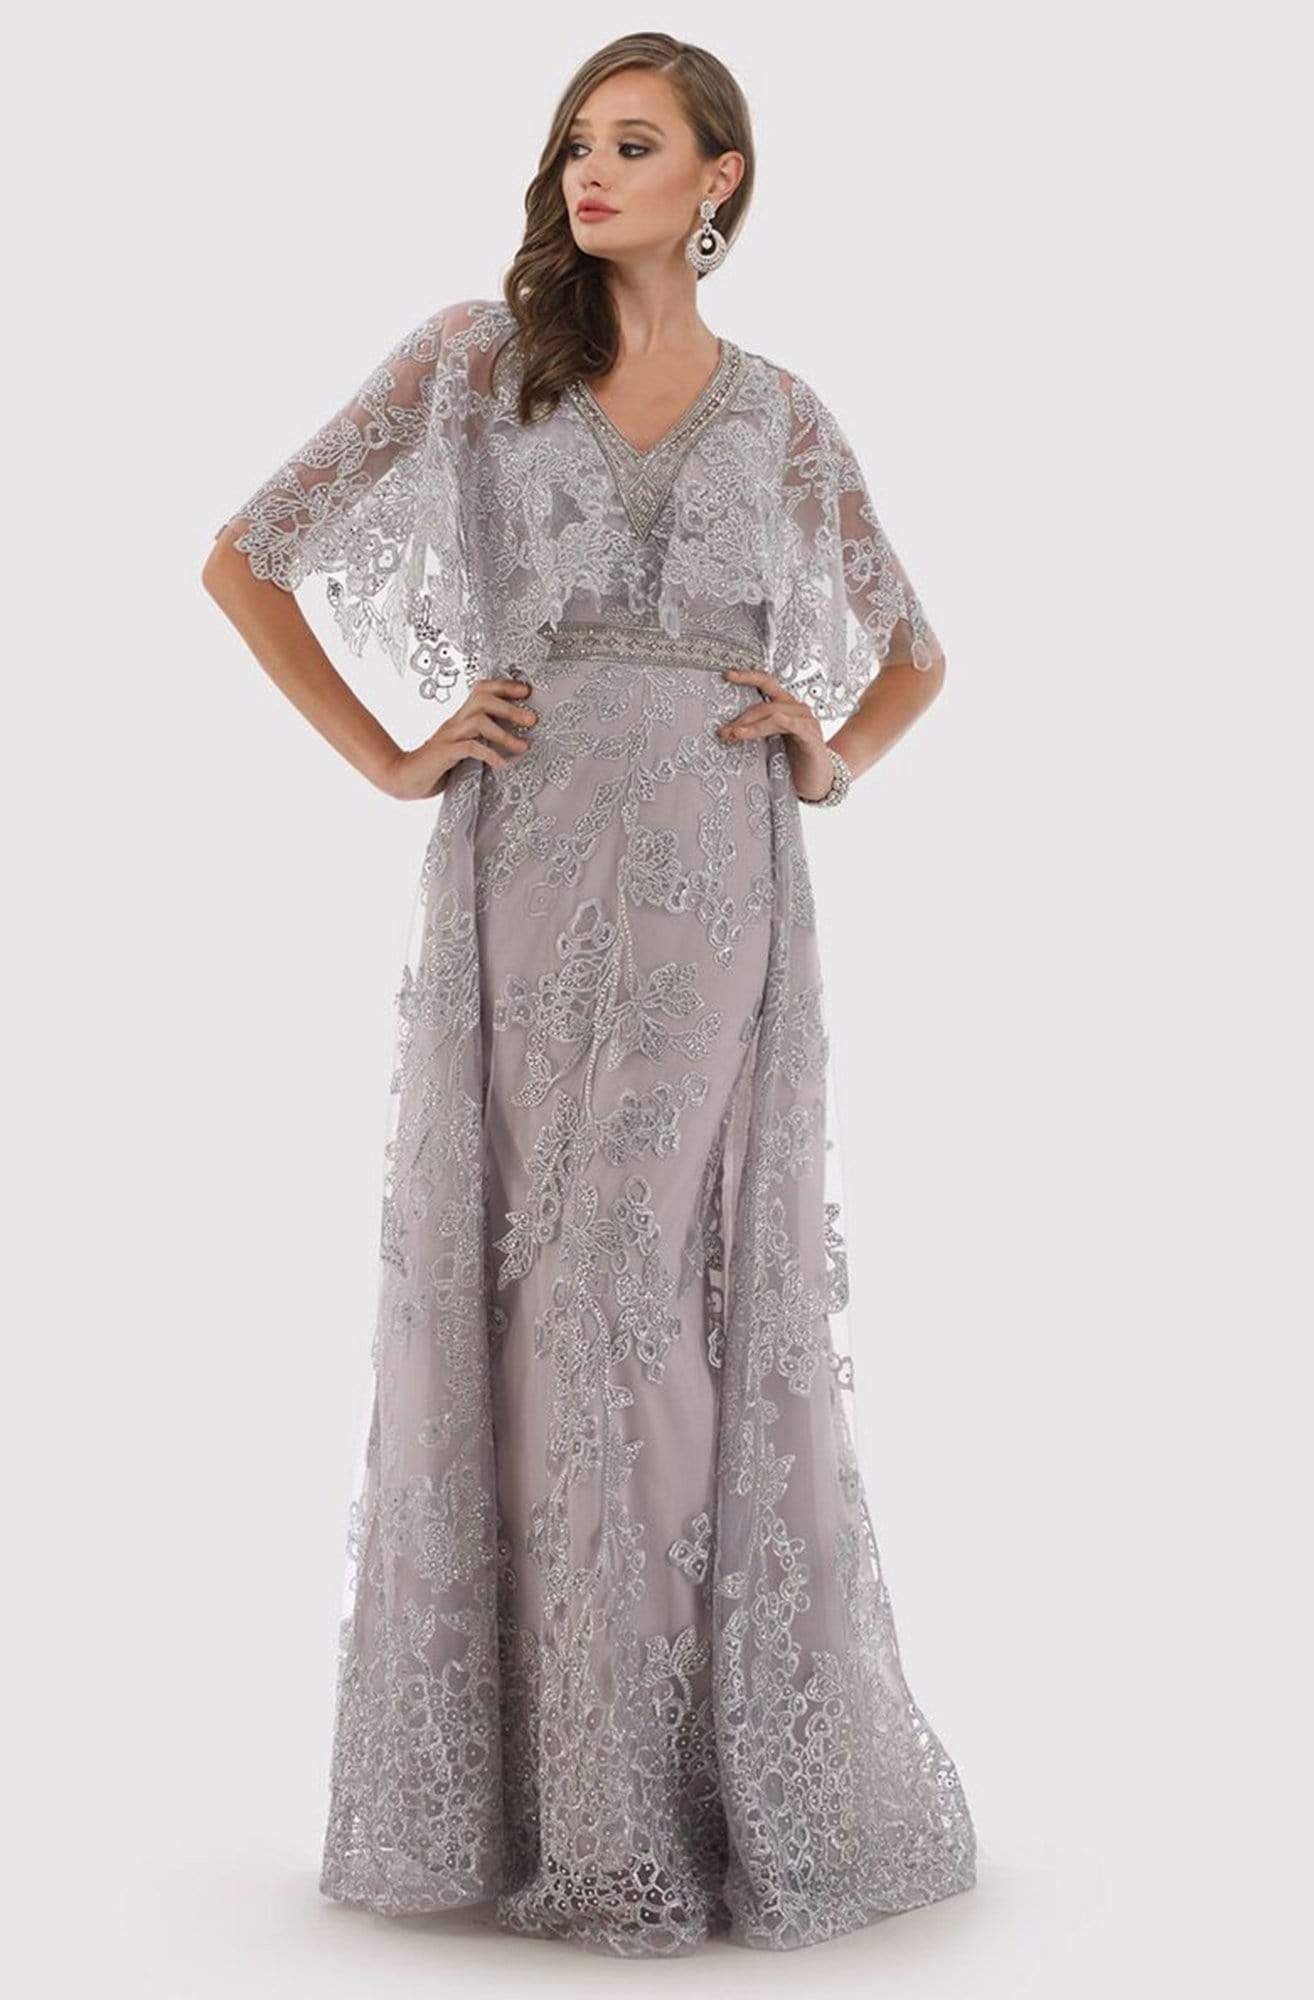 Image of Lara Dresses - 29799 Lace Appliqued Cape Sleeve Gown with Overskirt